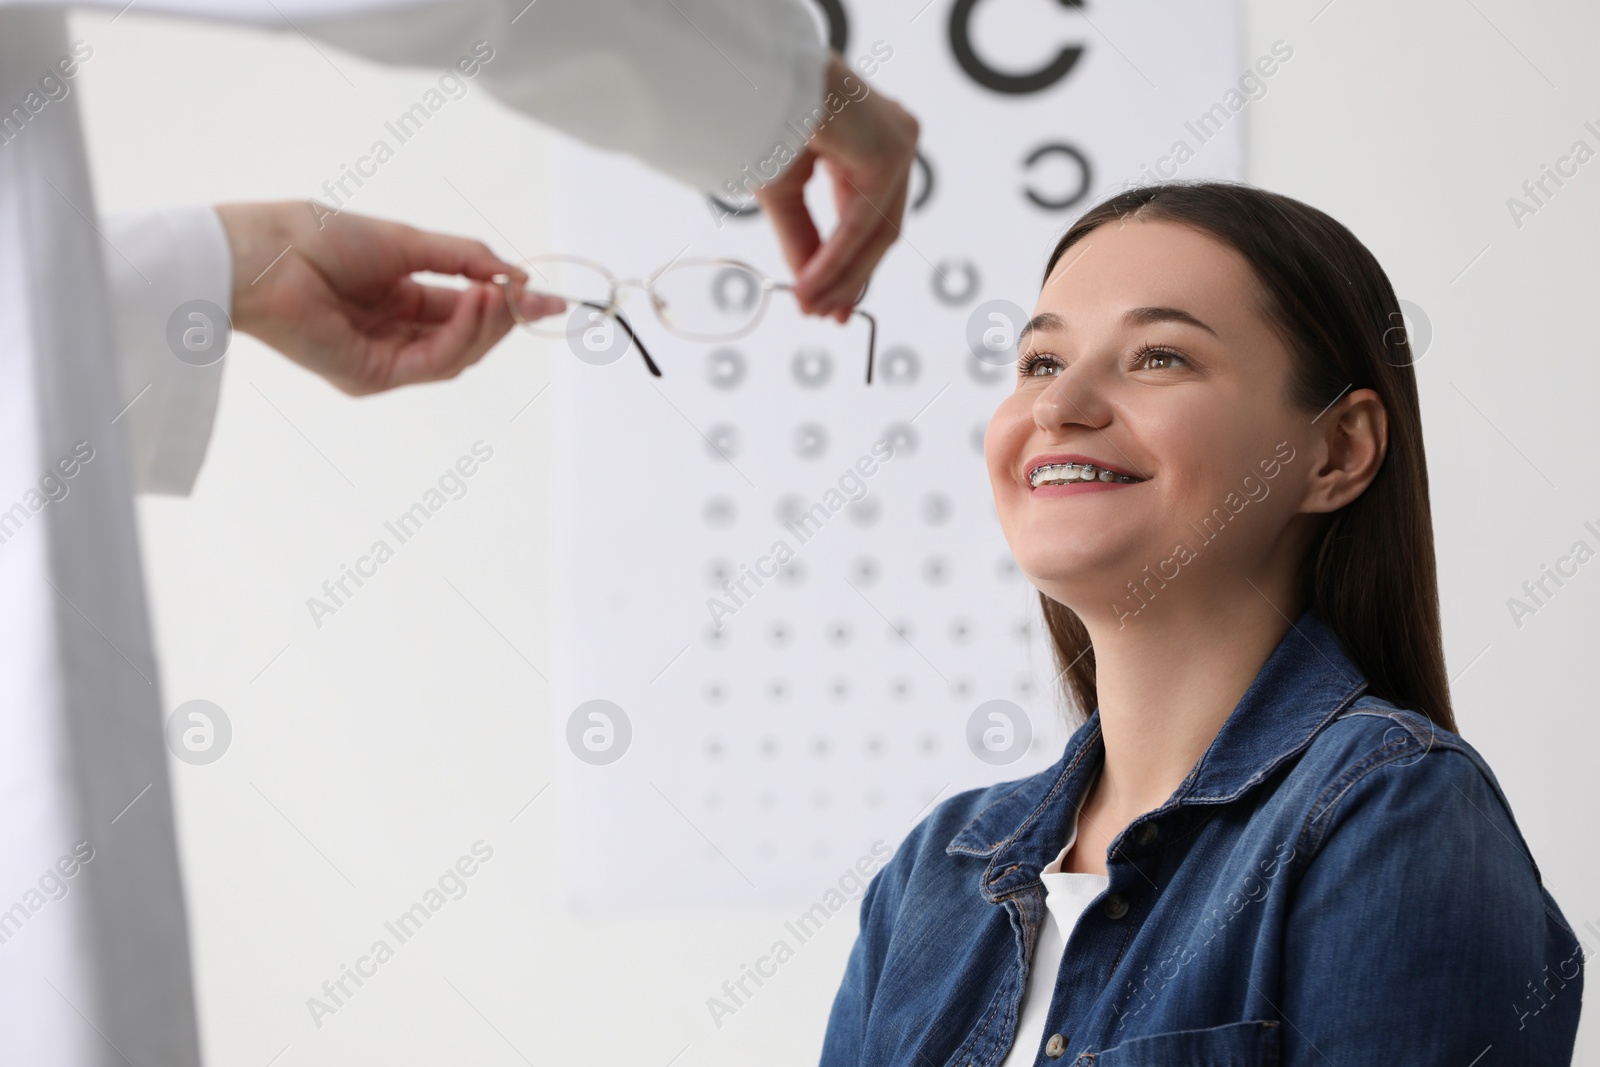 Photo of Vision testing. Ophthalmologist giving glasses to young woman indoors